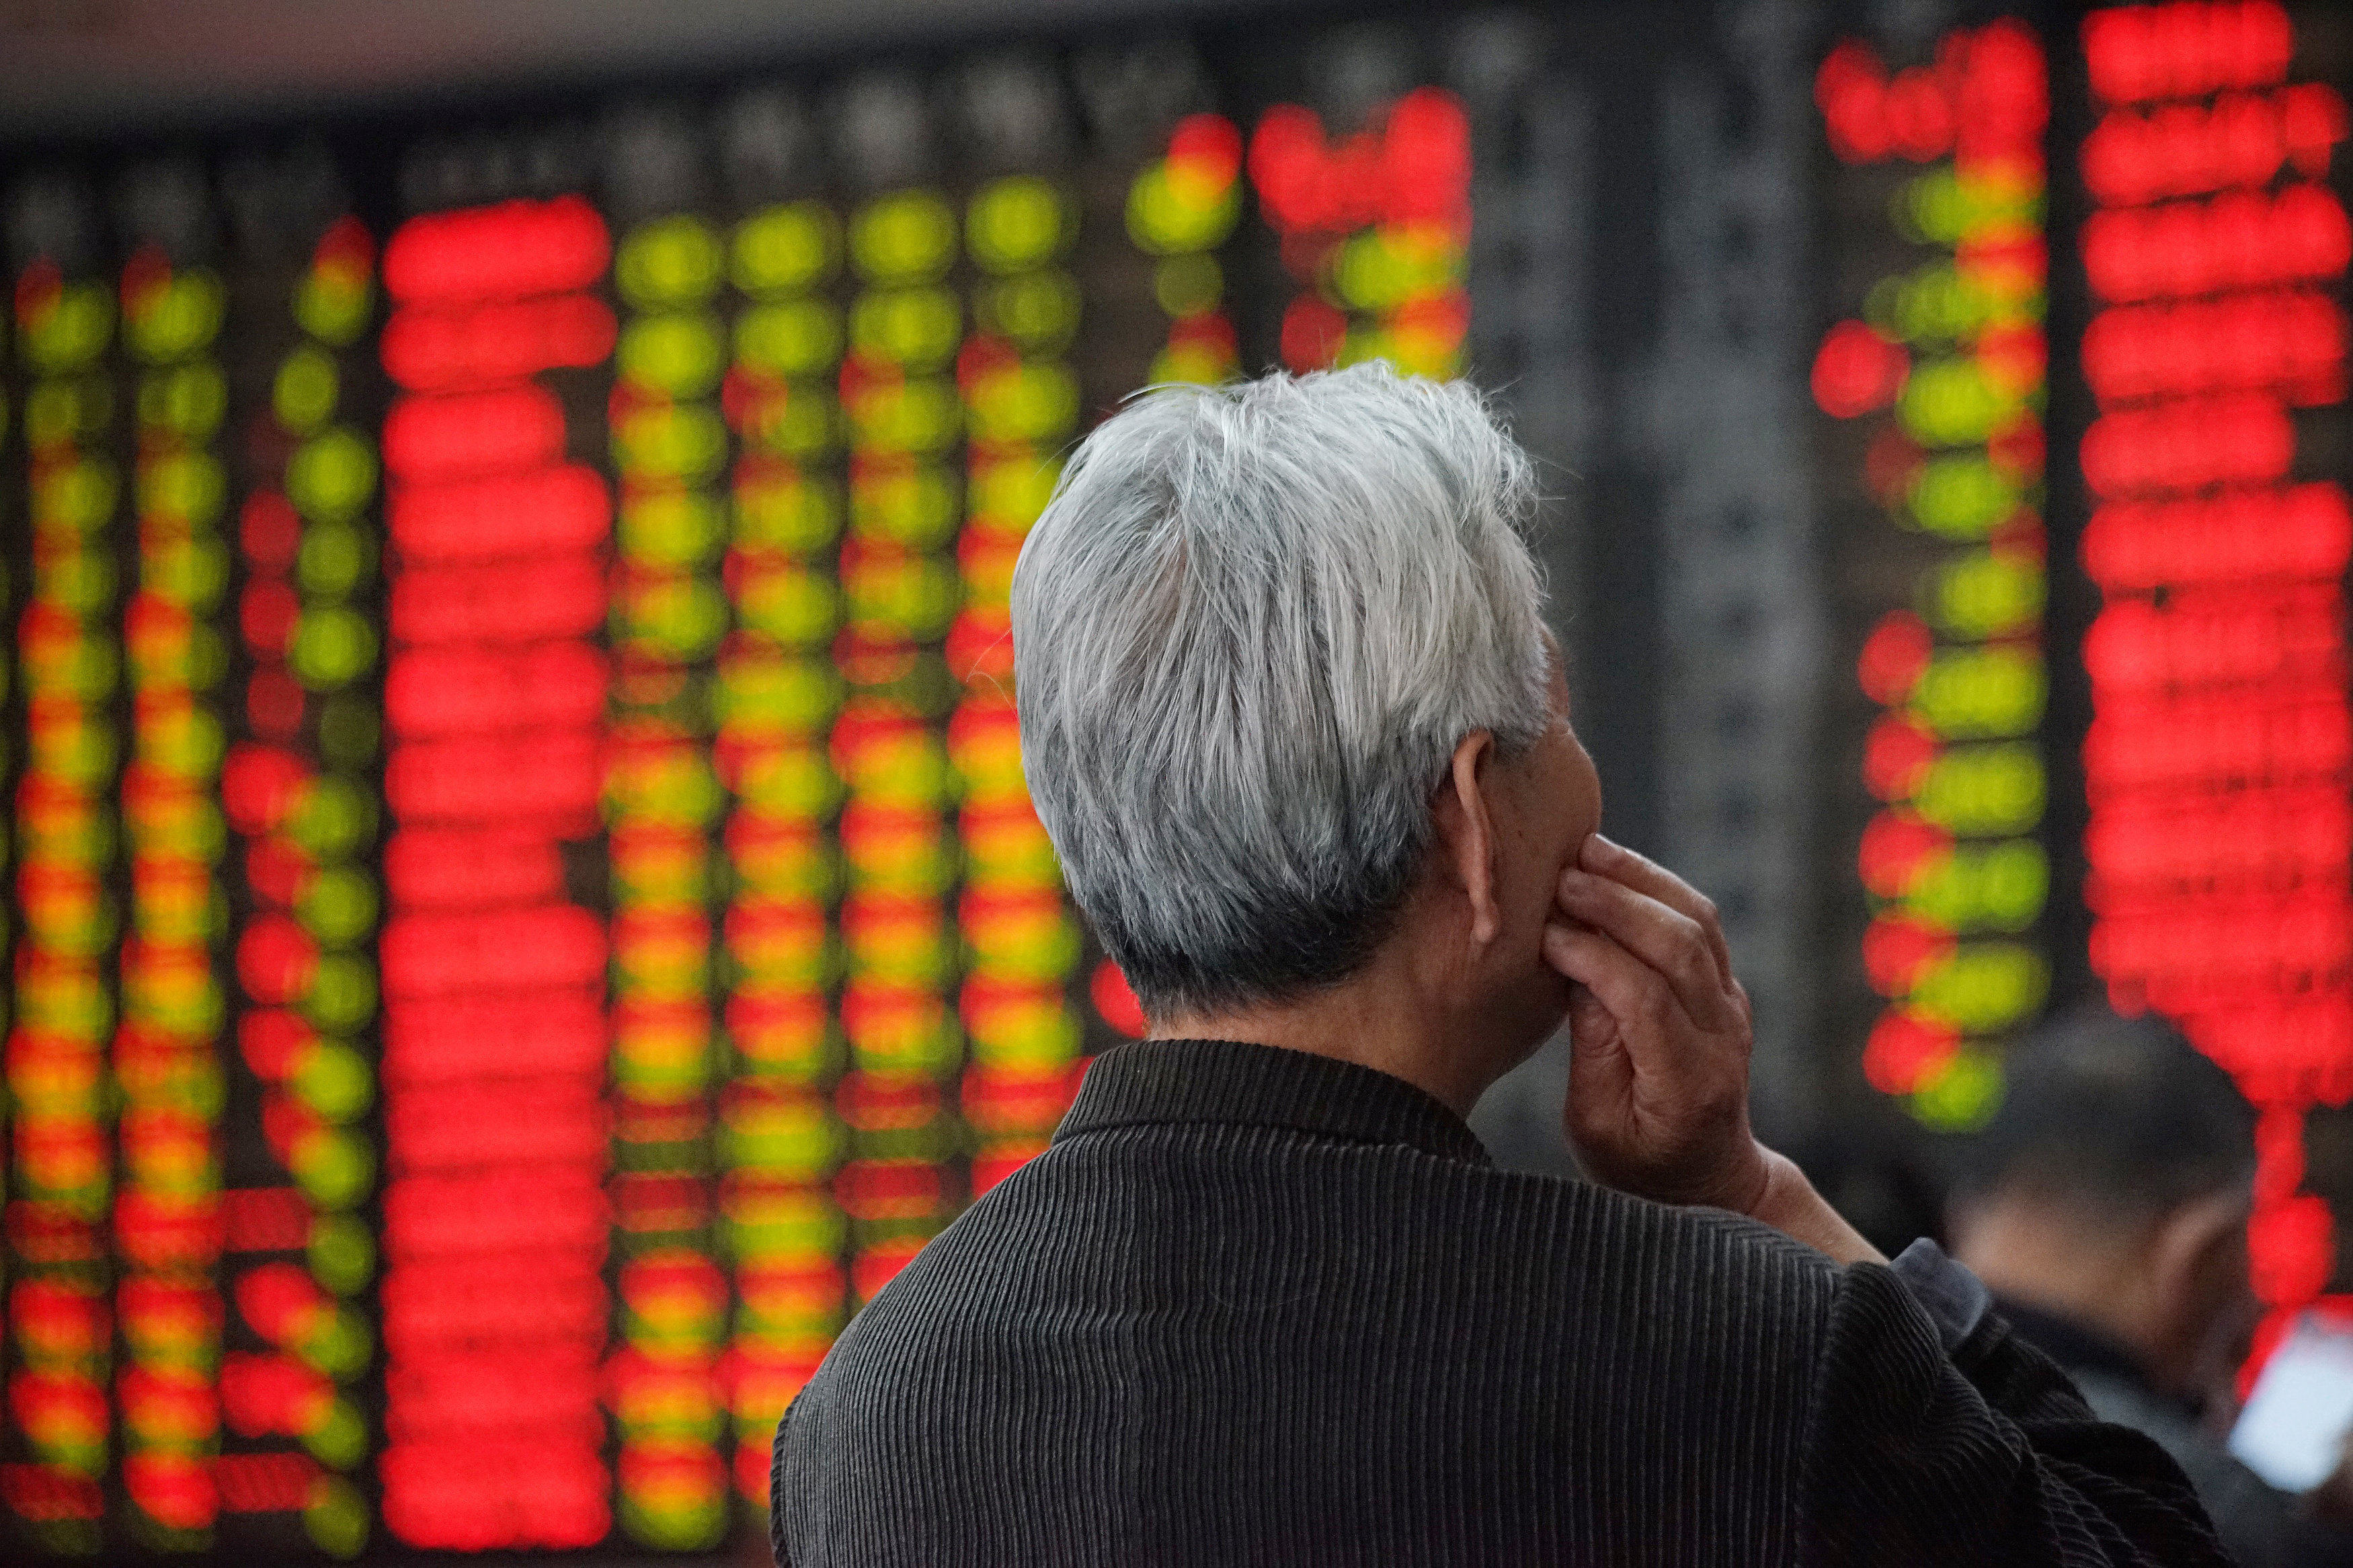 An investor looks at an electronic board showing stock information at a brokerage house in Nanjing, Jiangsu province. Photo: Reuters